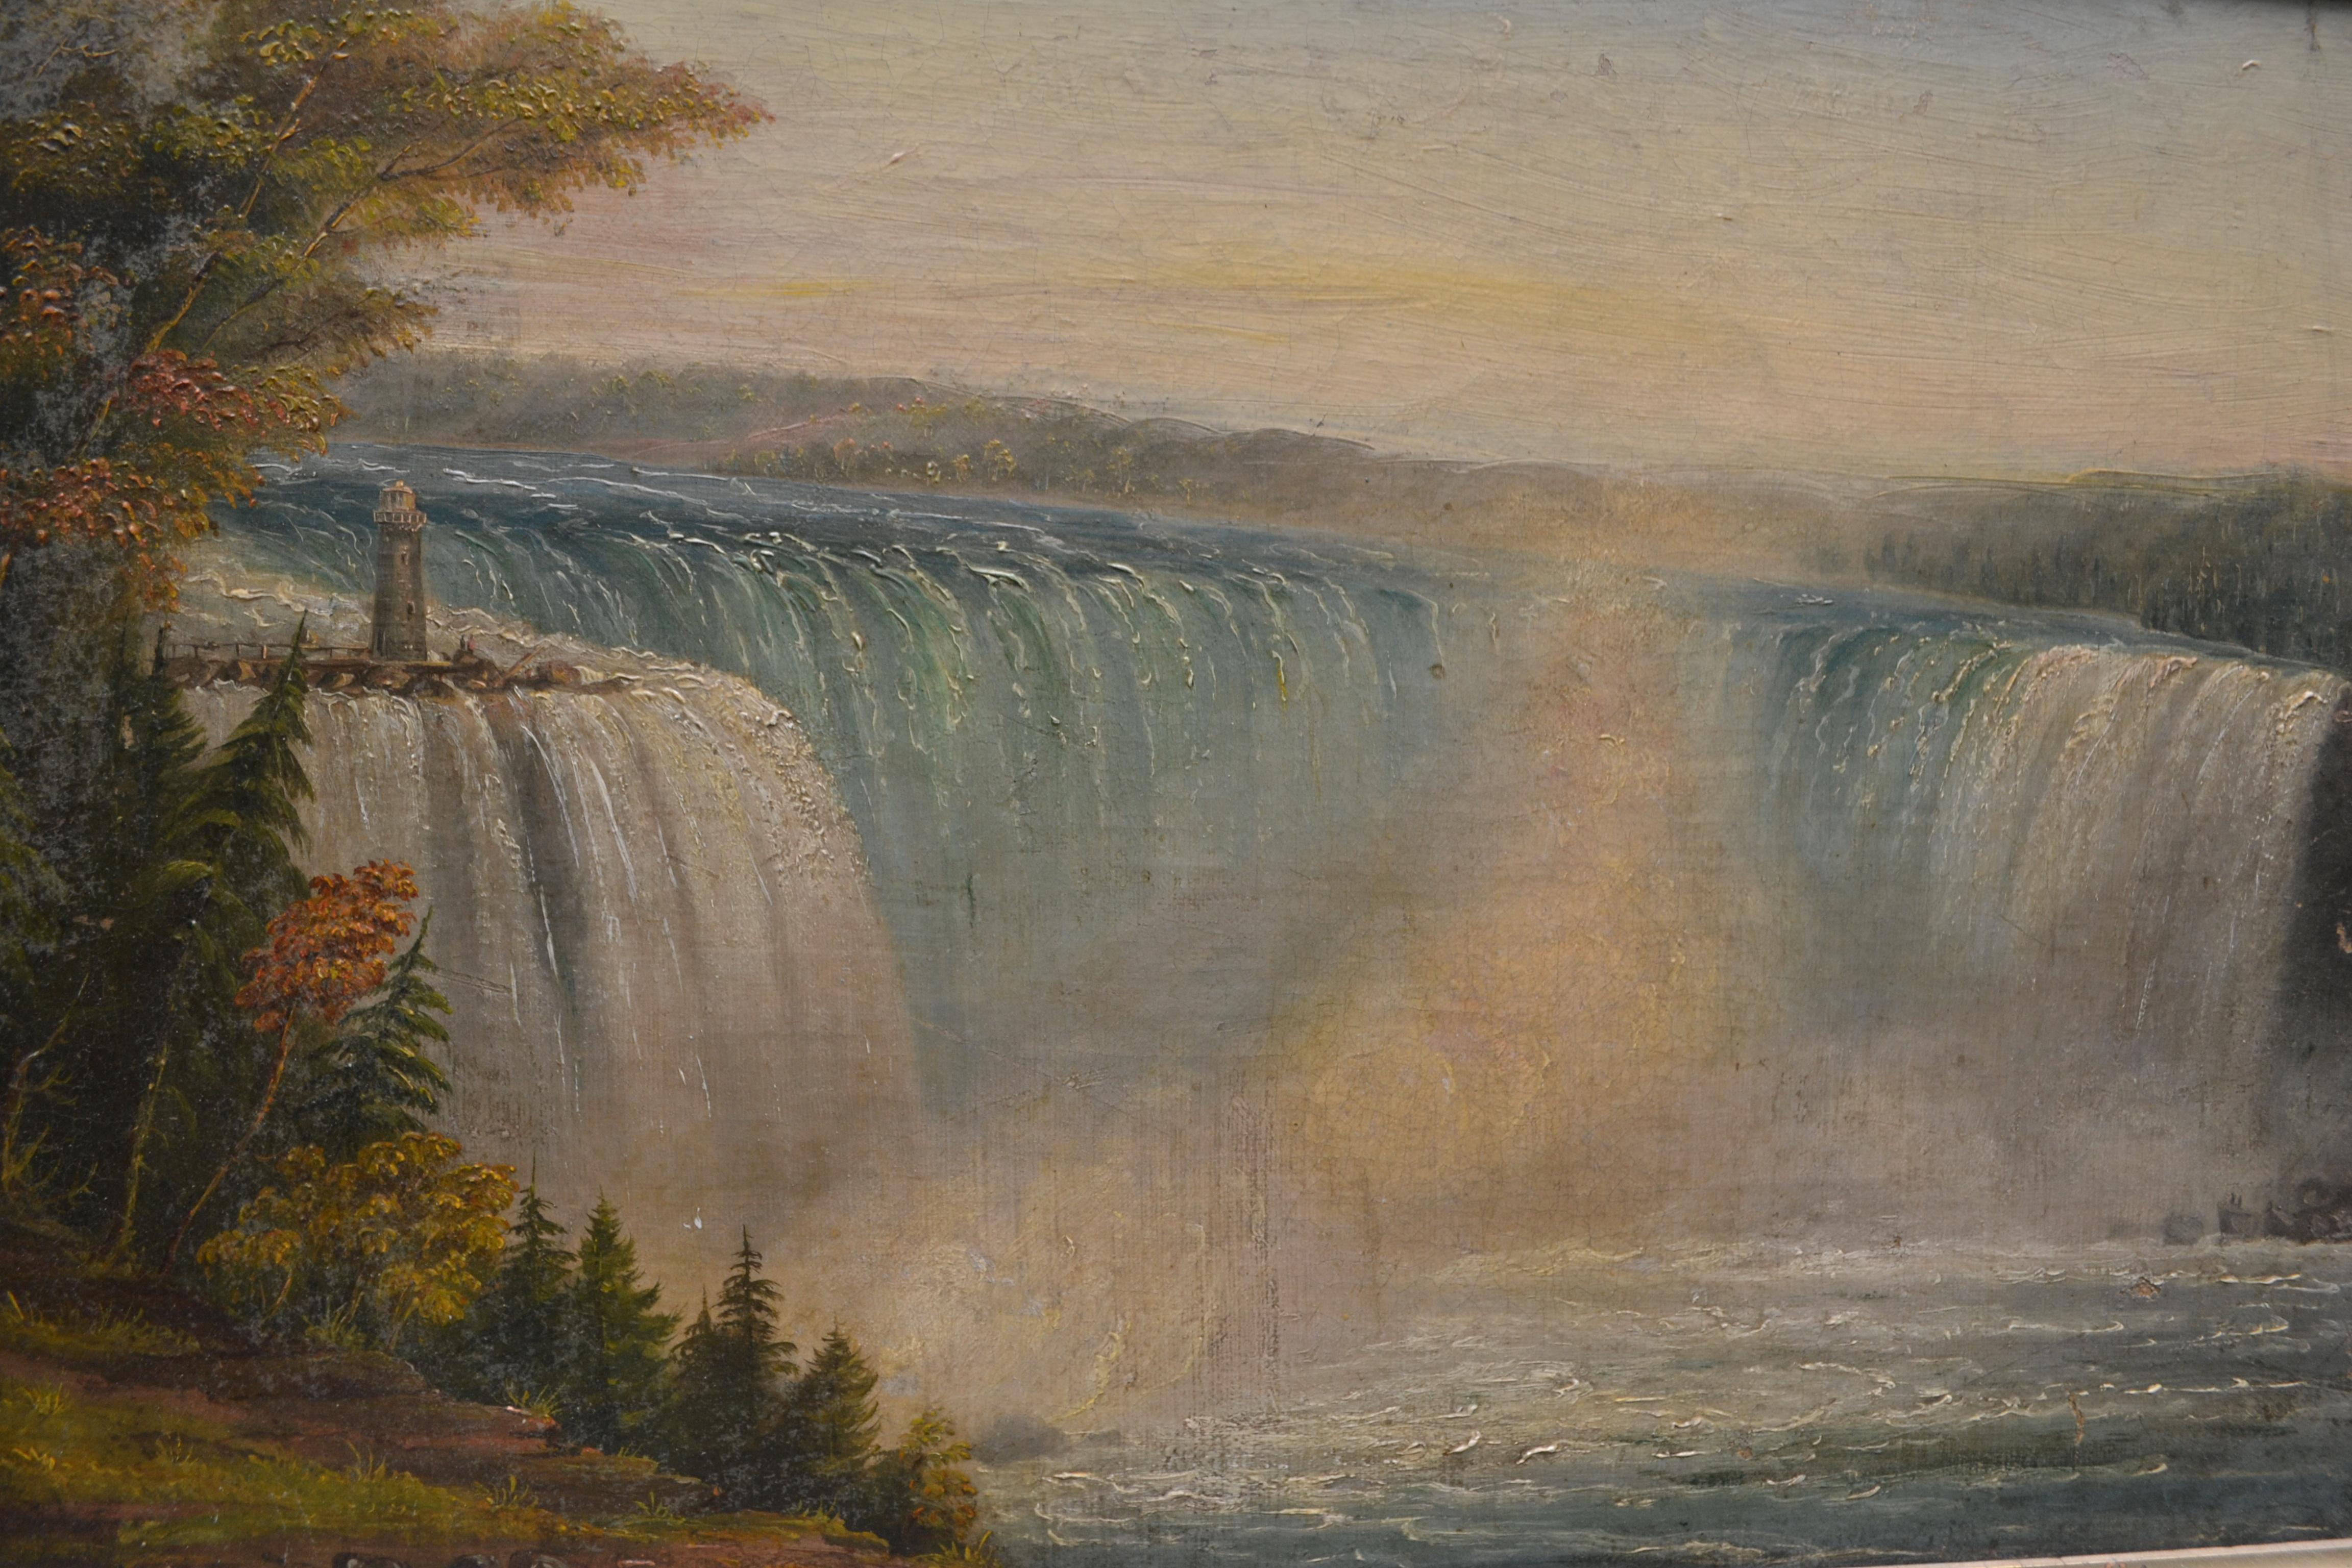 A small oil on canvas of Niagara Falls showing the original lighthouse attributed to Robert Whale, presented in a period gilded wooden frame. 

Robert Reginald Whale was born in, Cornwall England in 1805. In 1852, Whale and his family emigrated to